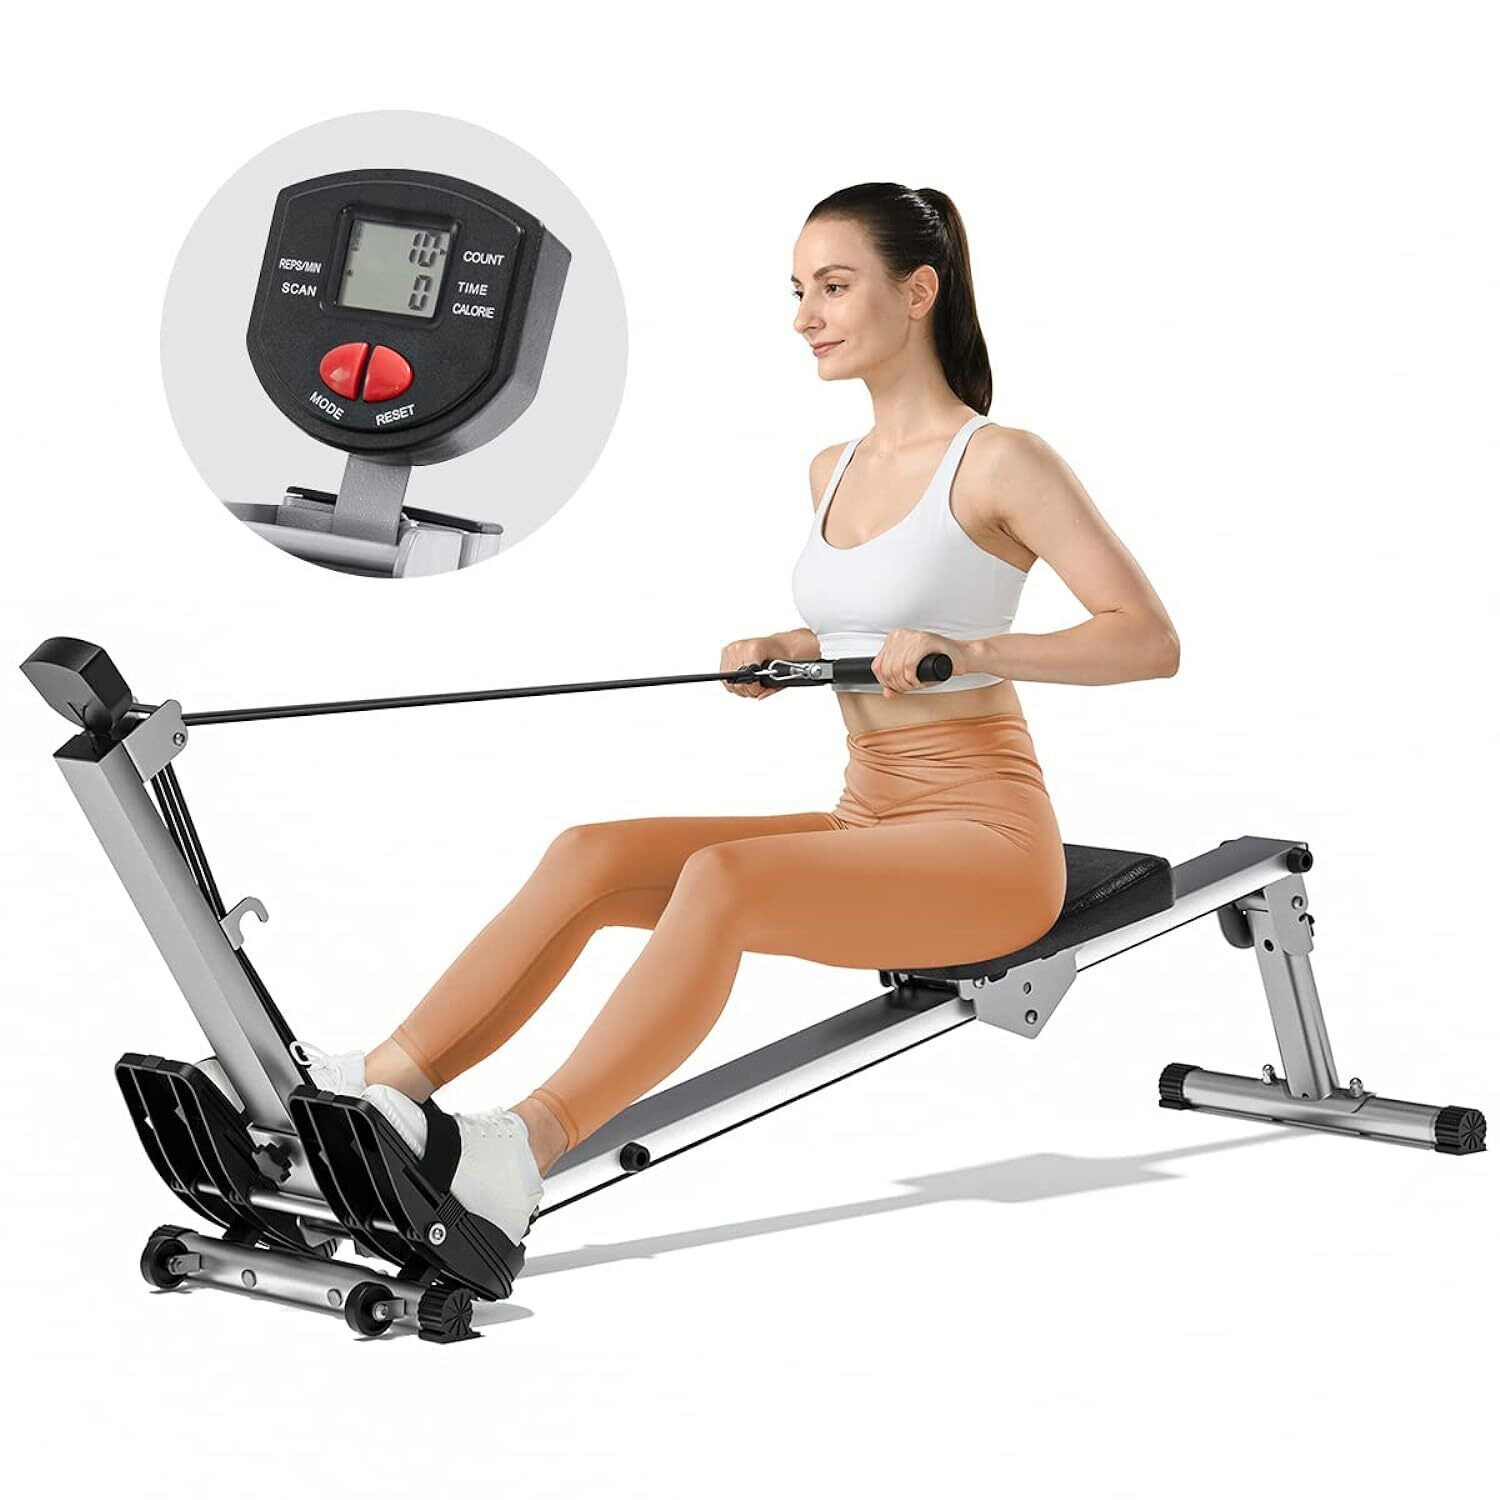 Rowing Machine For Home Use, Foldable Rowing Machinefor Full Body Exercise Car